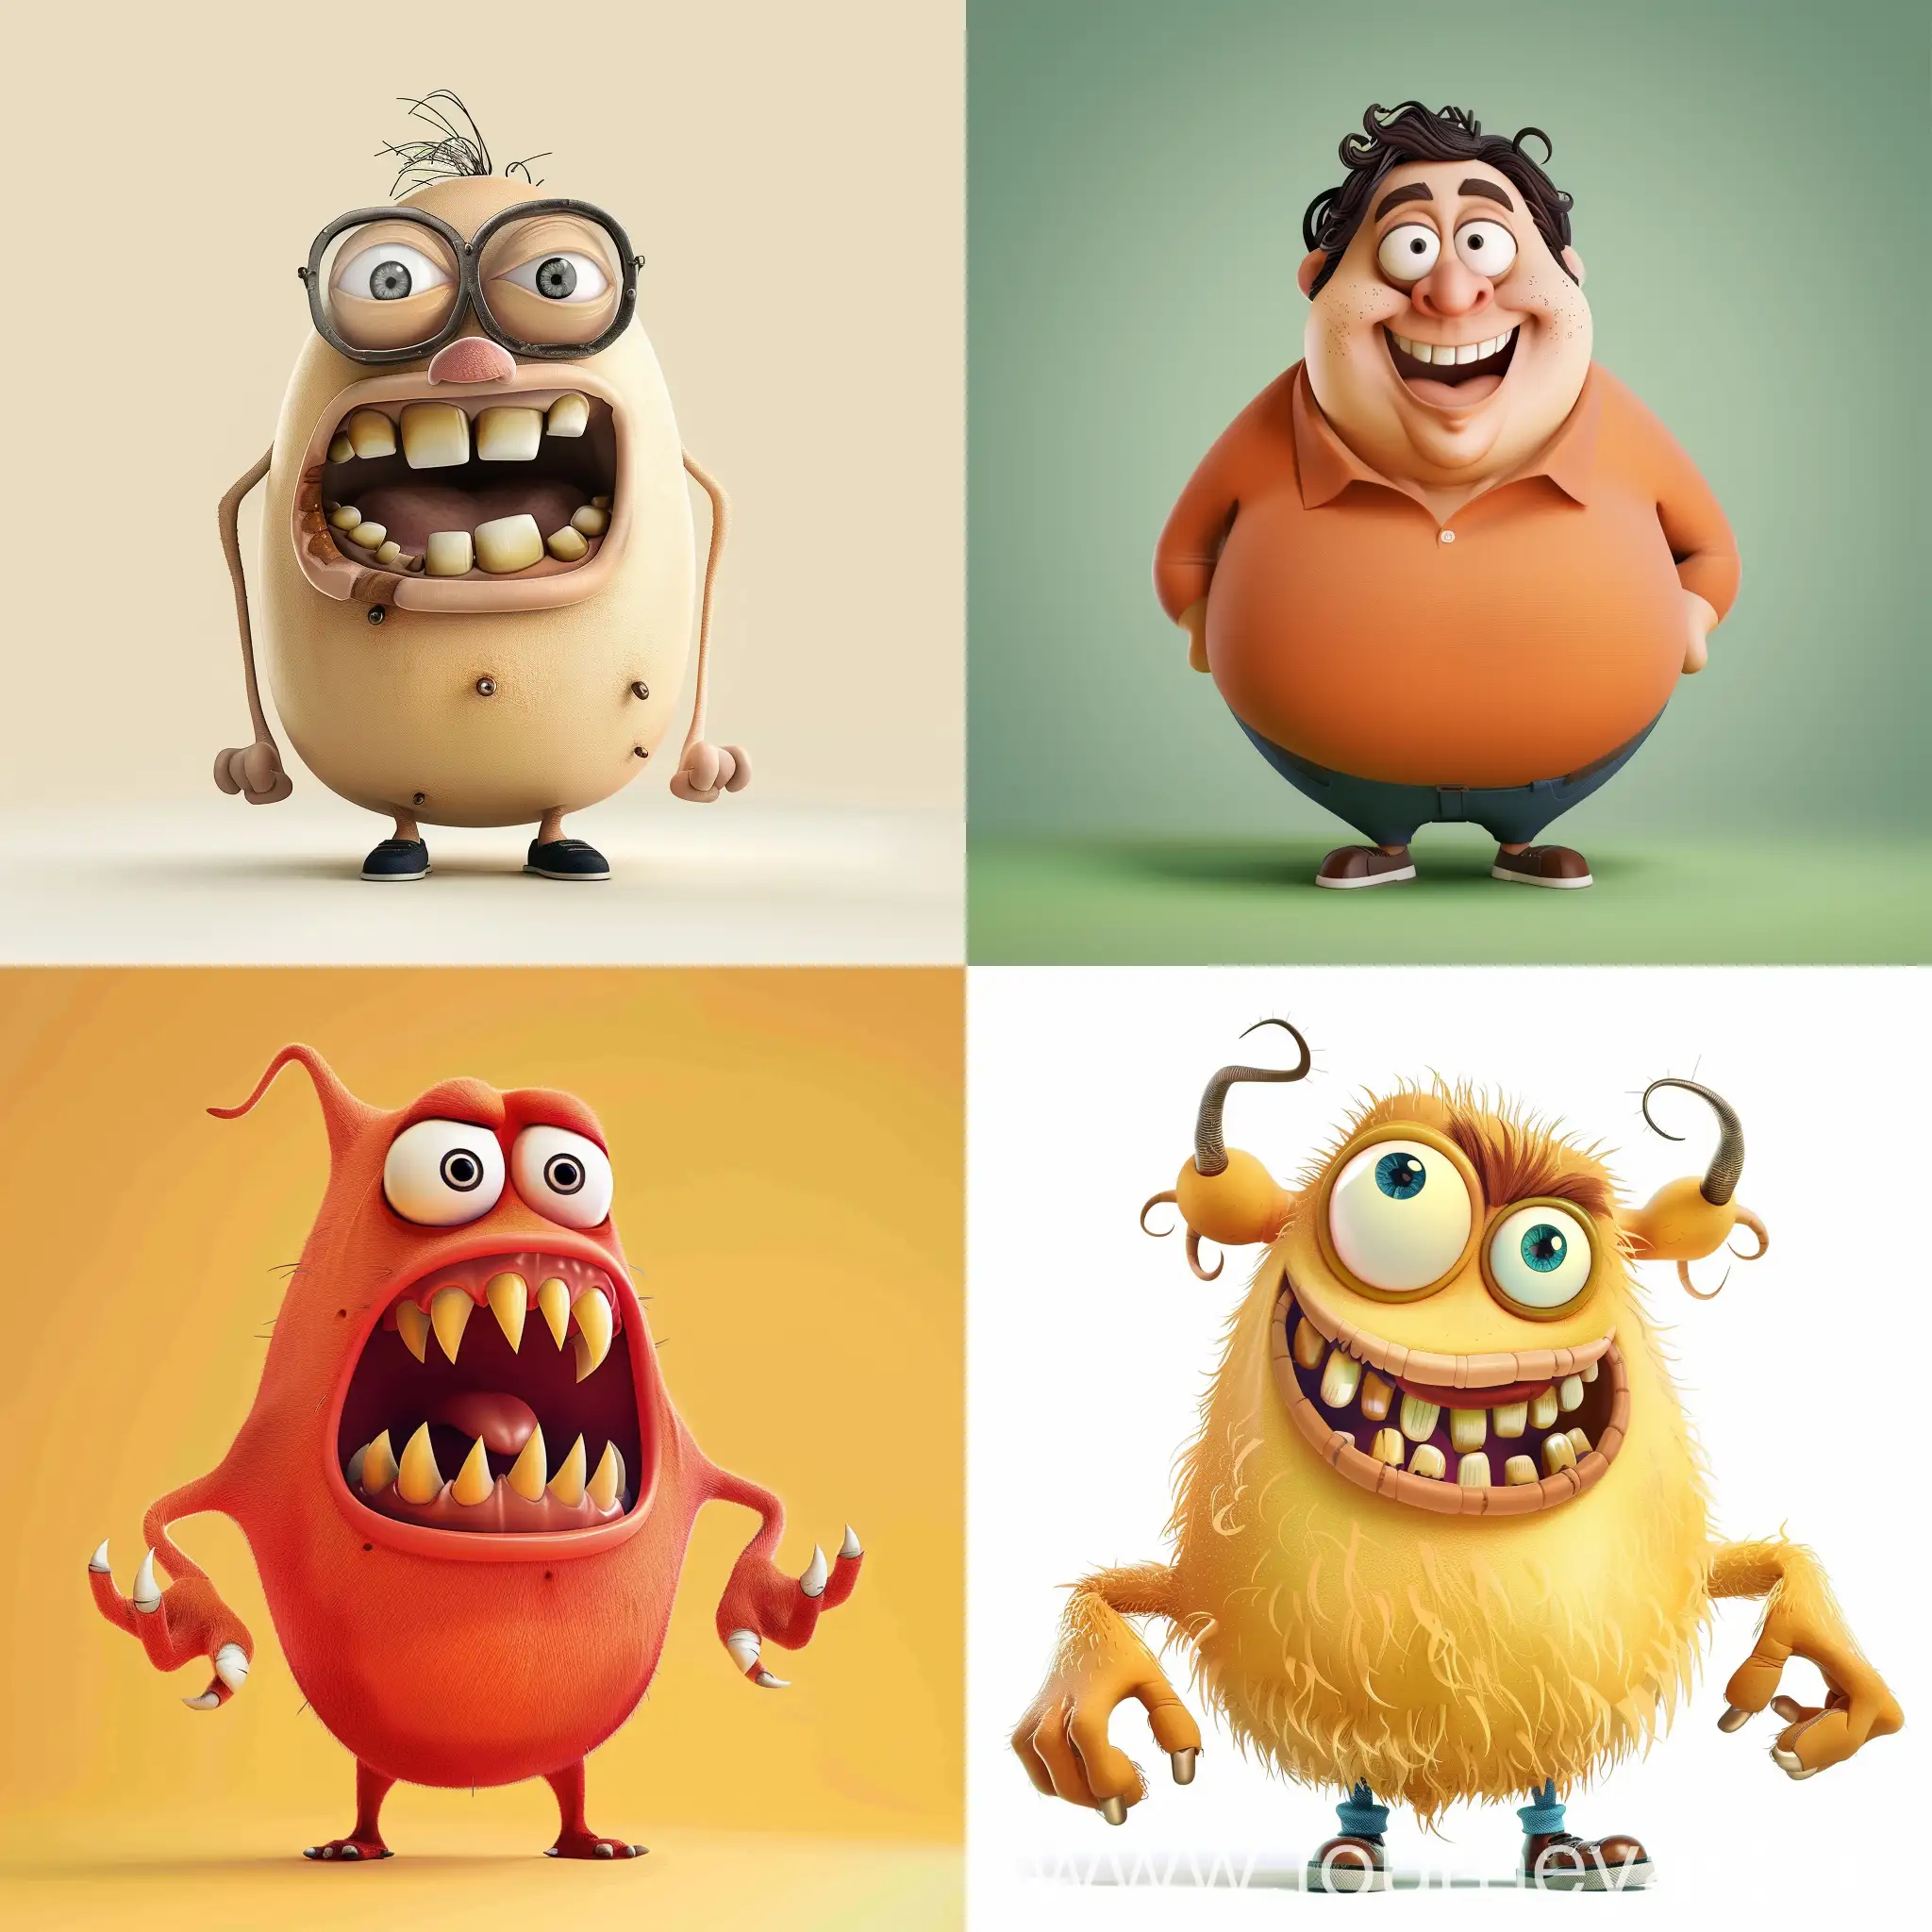 Cheerful-Cartoon-Character-with-Playful-Expression